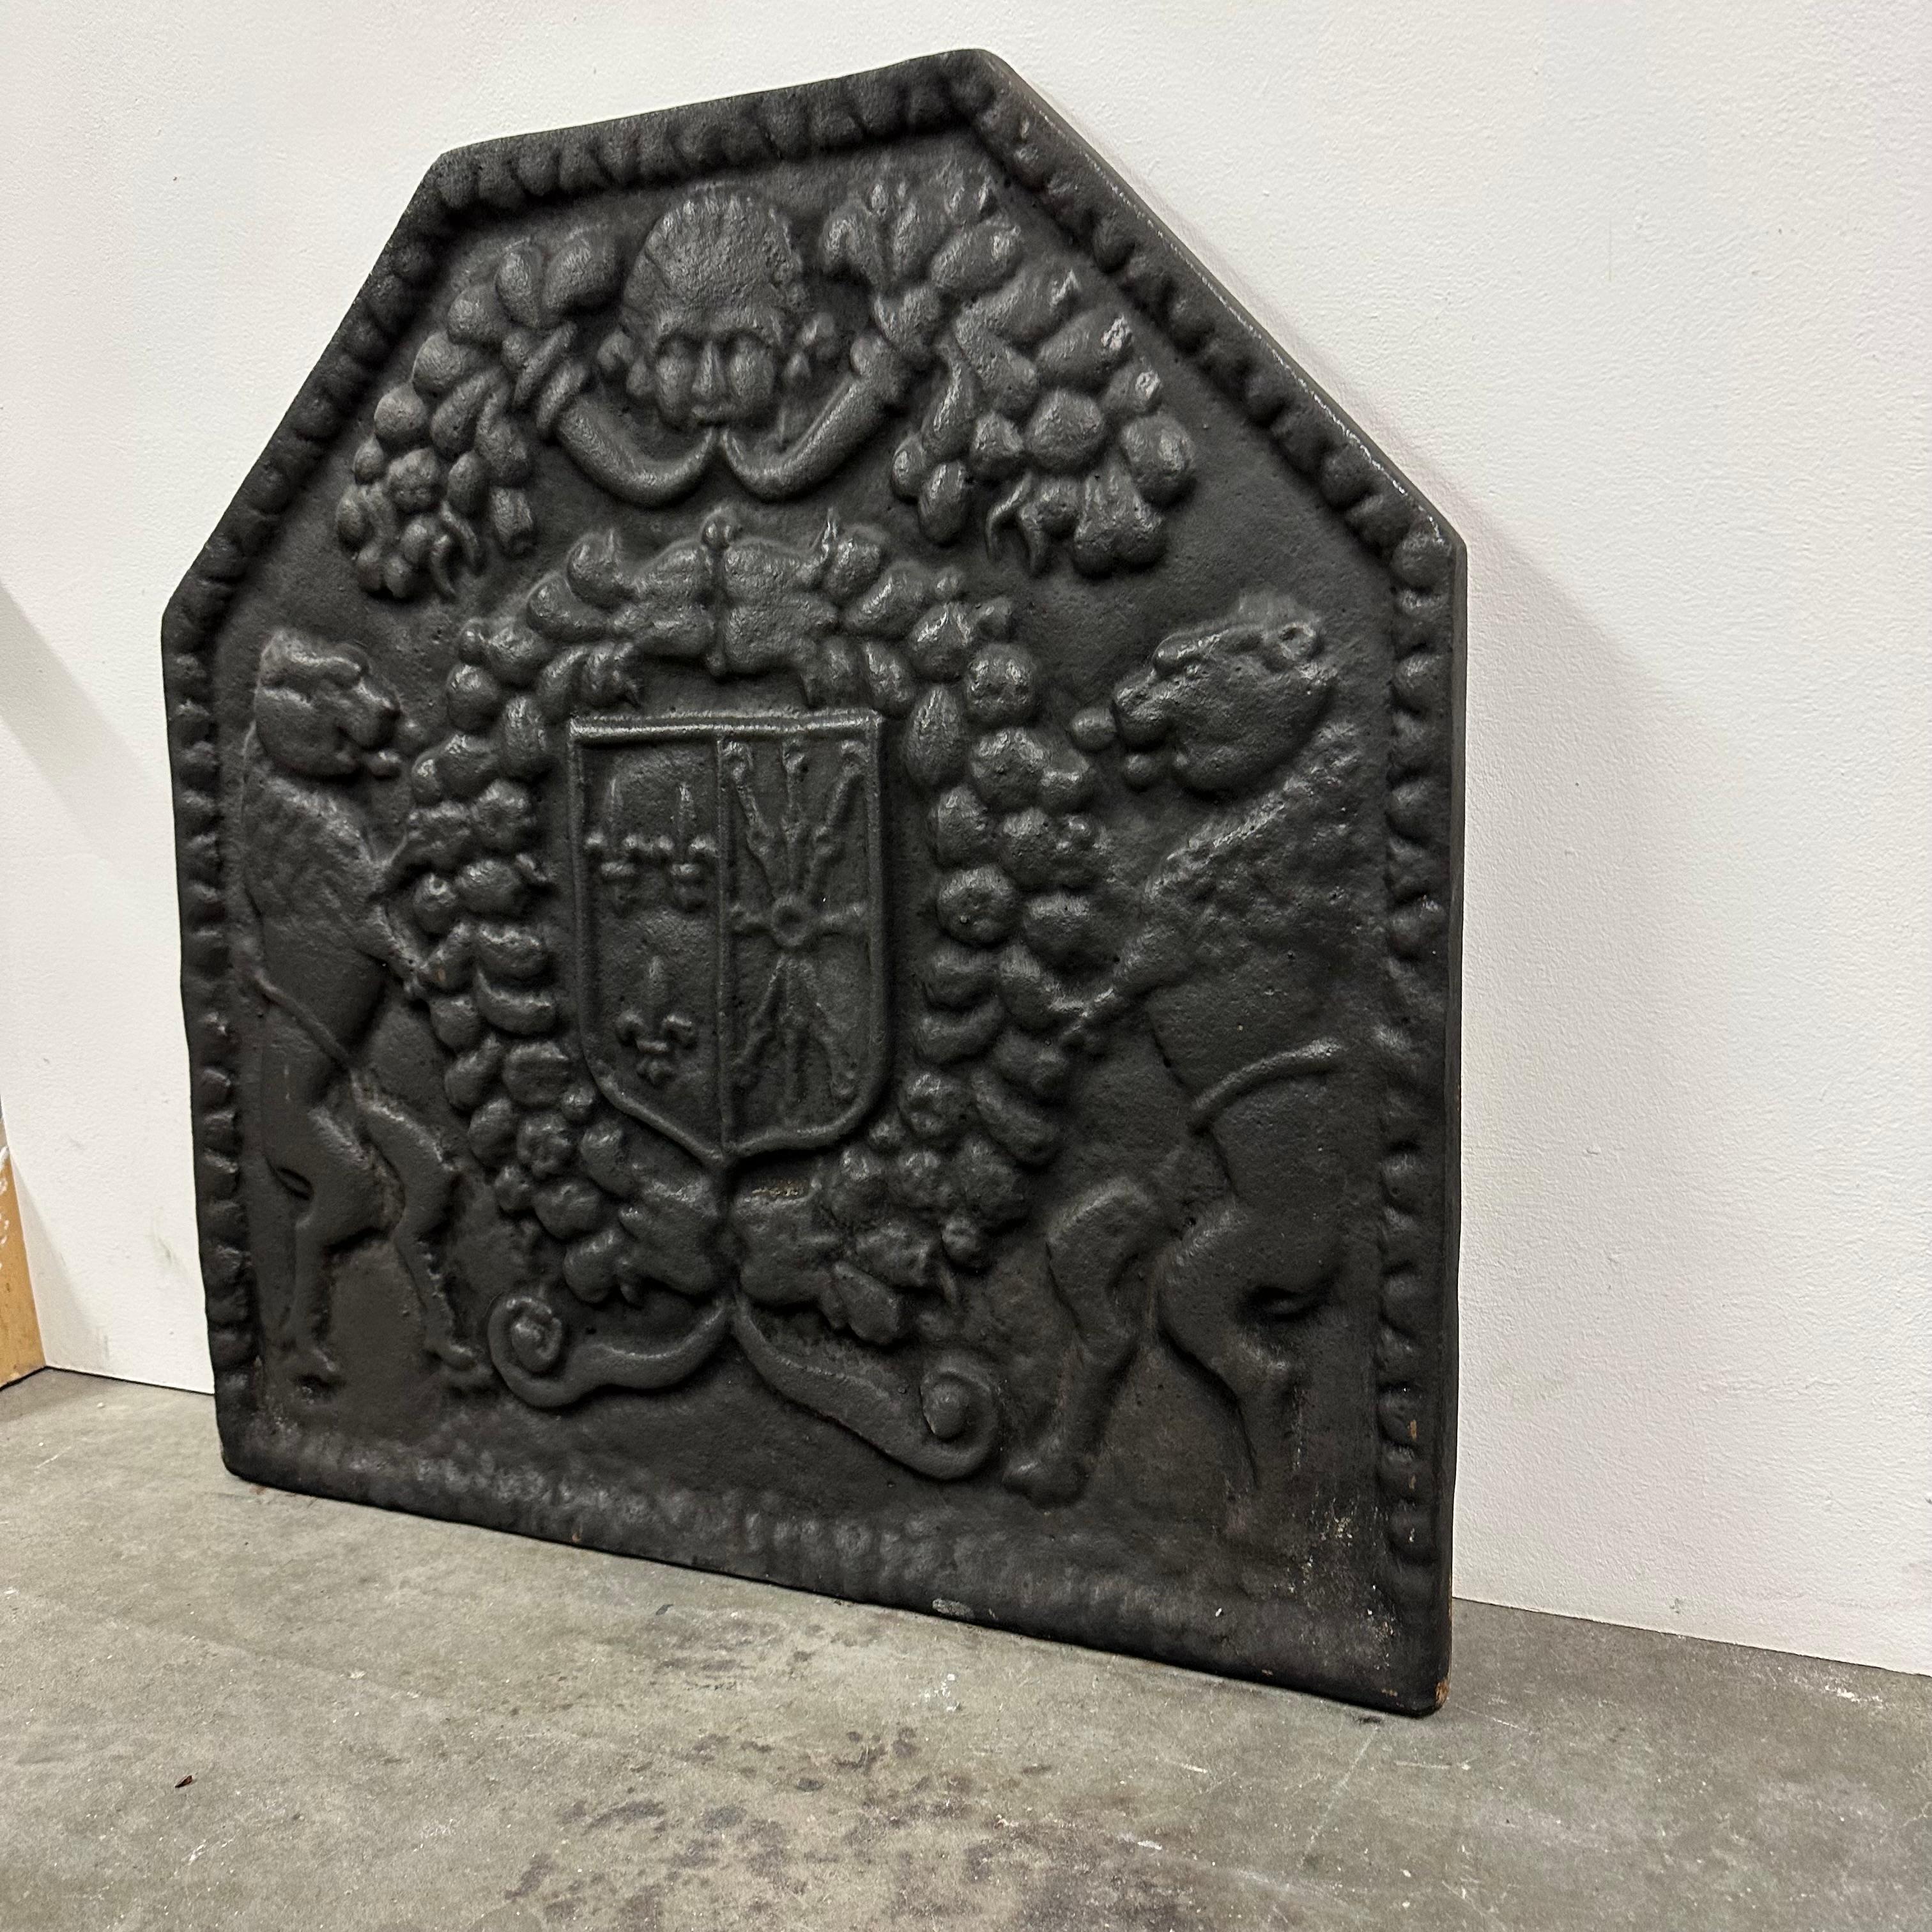 An very nice thick casted antique fireback / backsplash.
Nice decorative fireback with the Arms of France and Navarre held by two lions.

Superb quality, great piece.